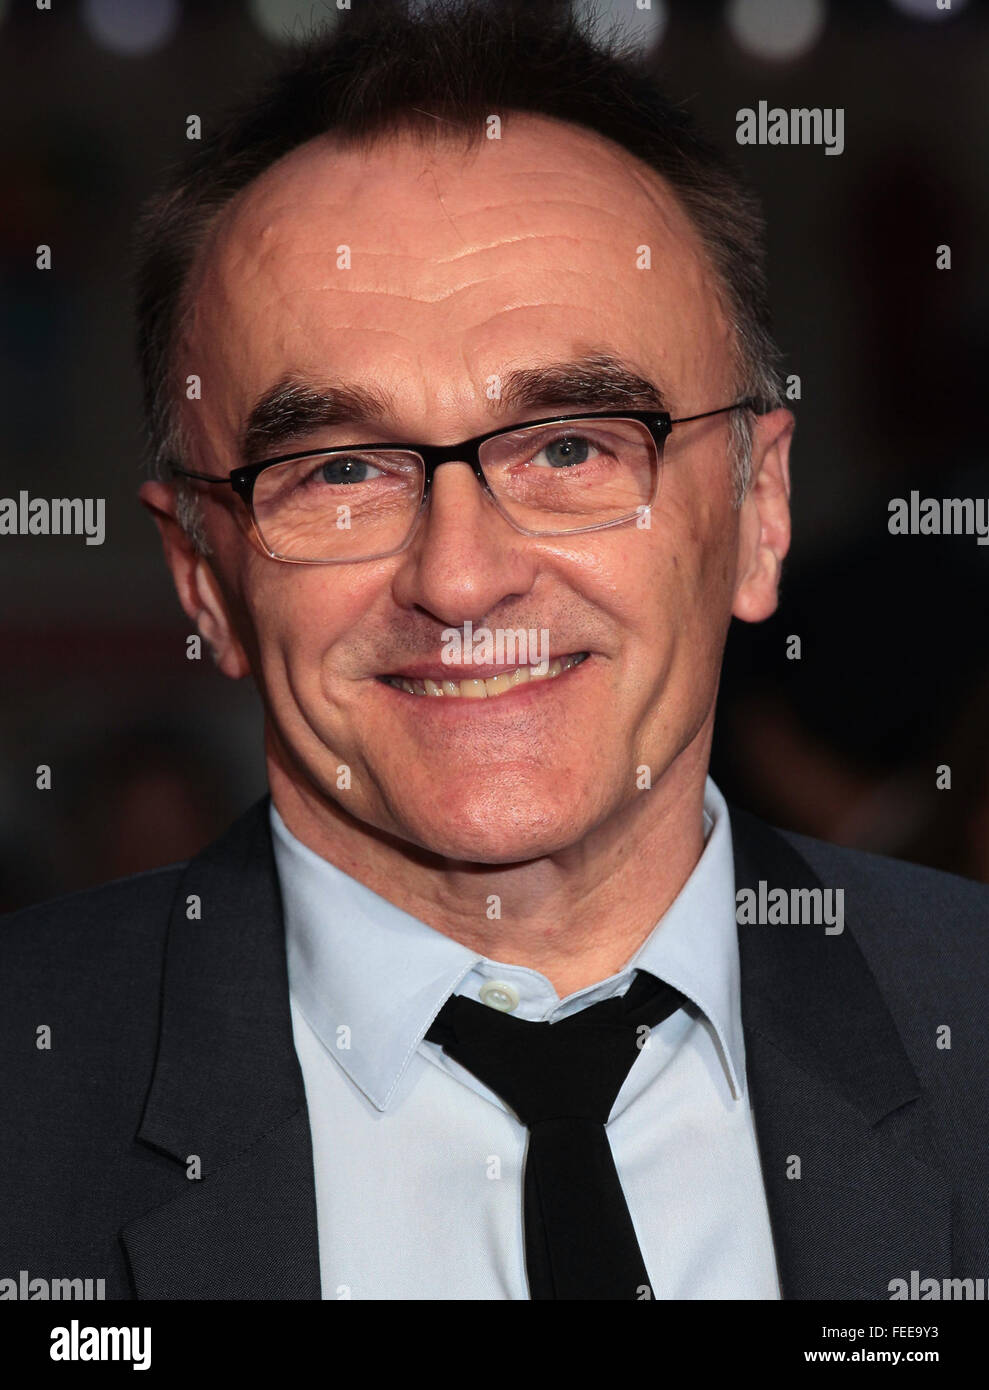 London, UK, 18th Oct 2015: Danny Boyle attends the Steve Jobs premiere and closing night gala, 59th BFI London Film Festival at Stock Photo